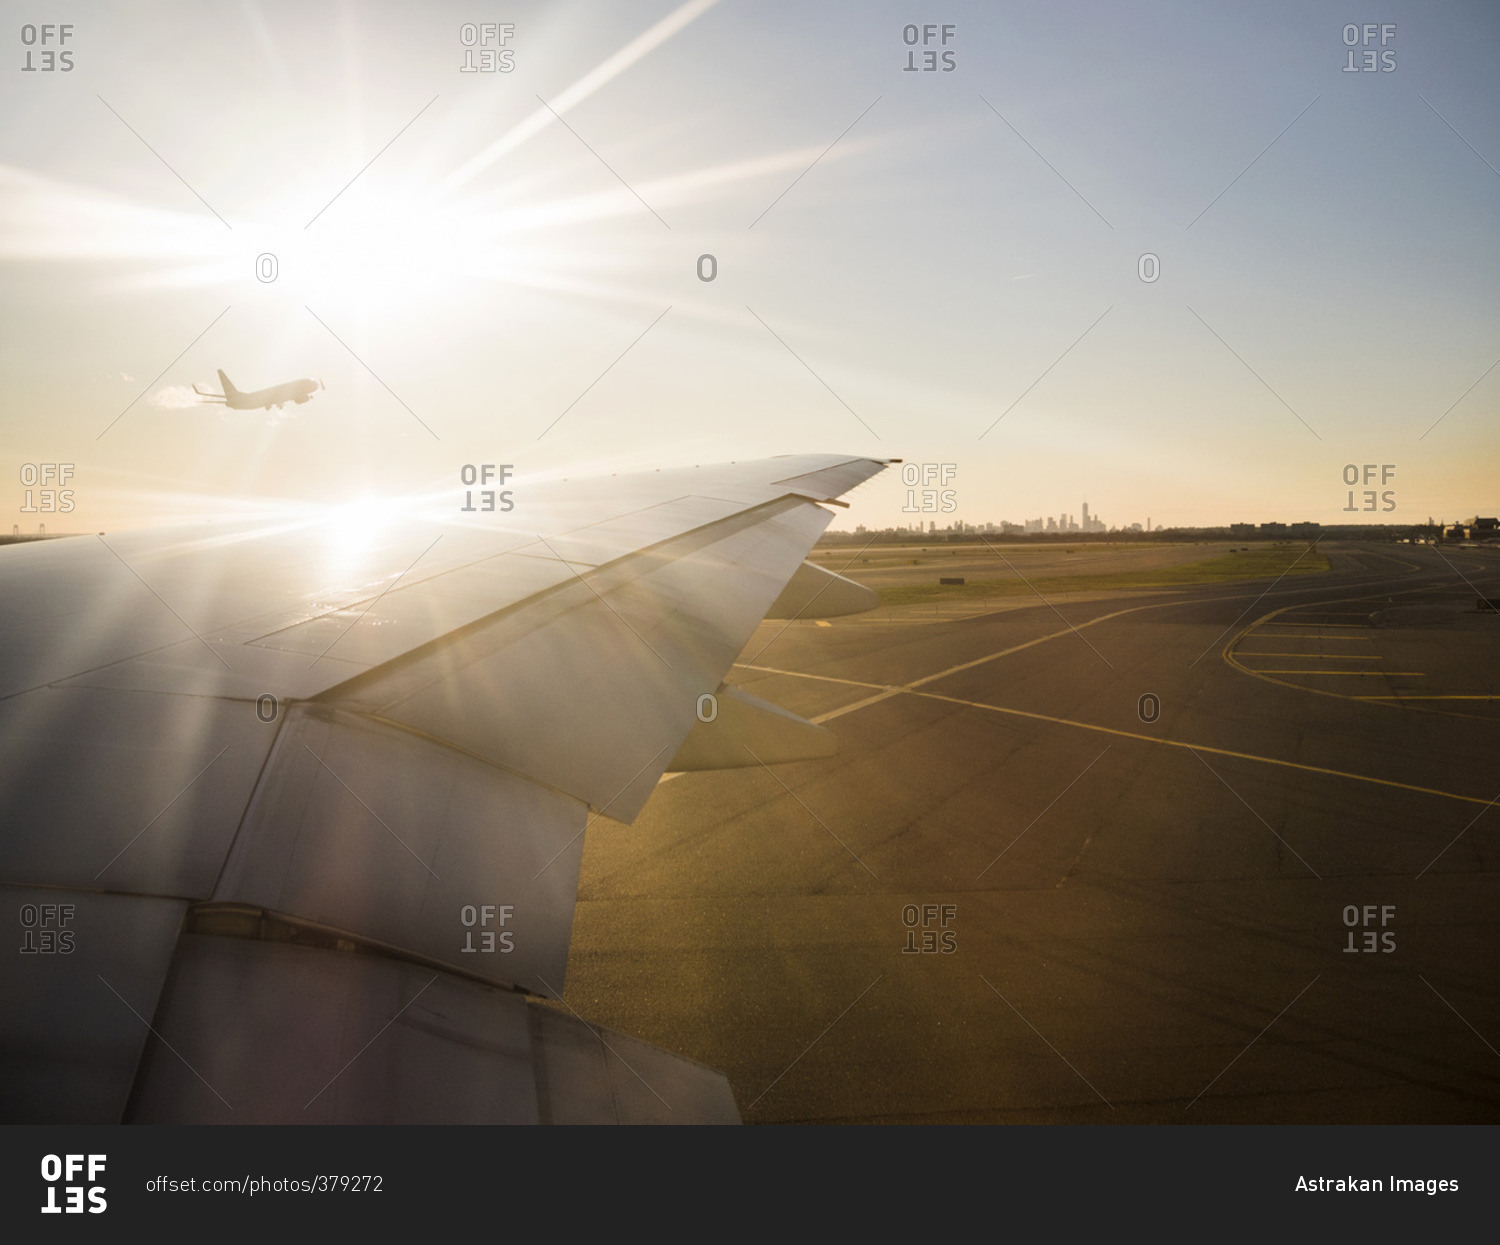 Cropped image of airplane on airport runway against shining sun